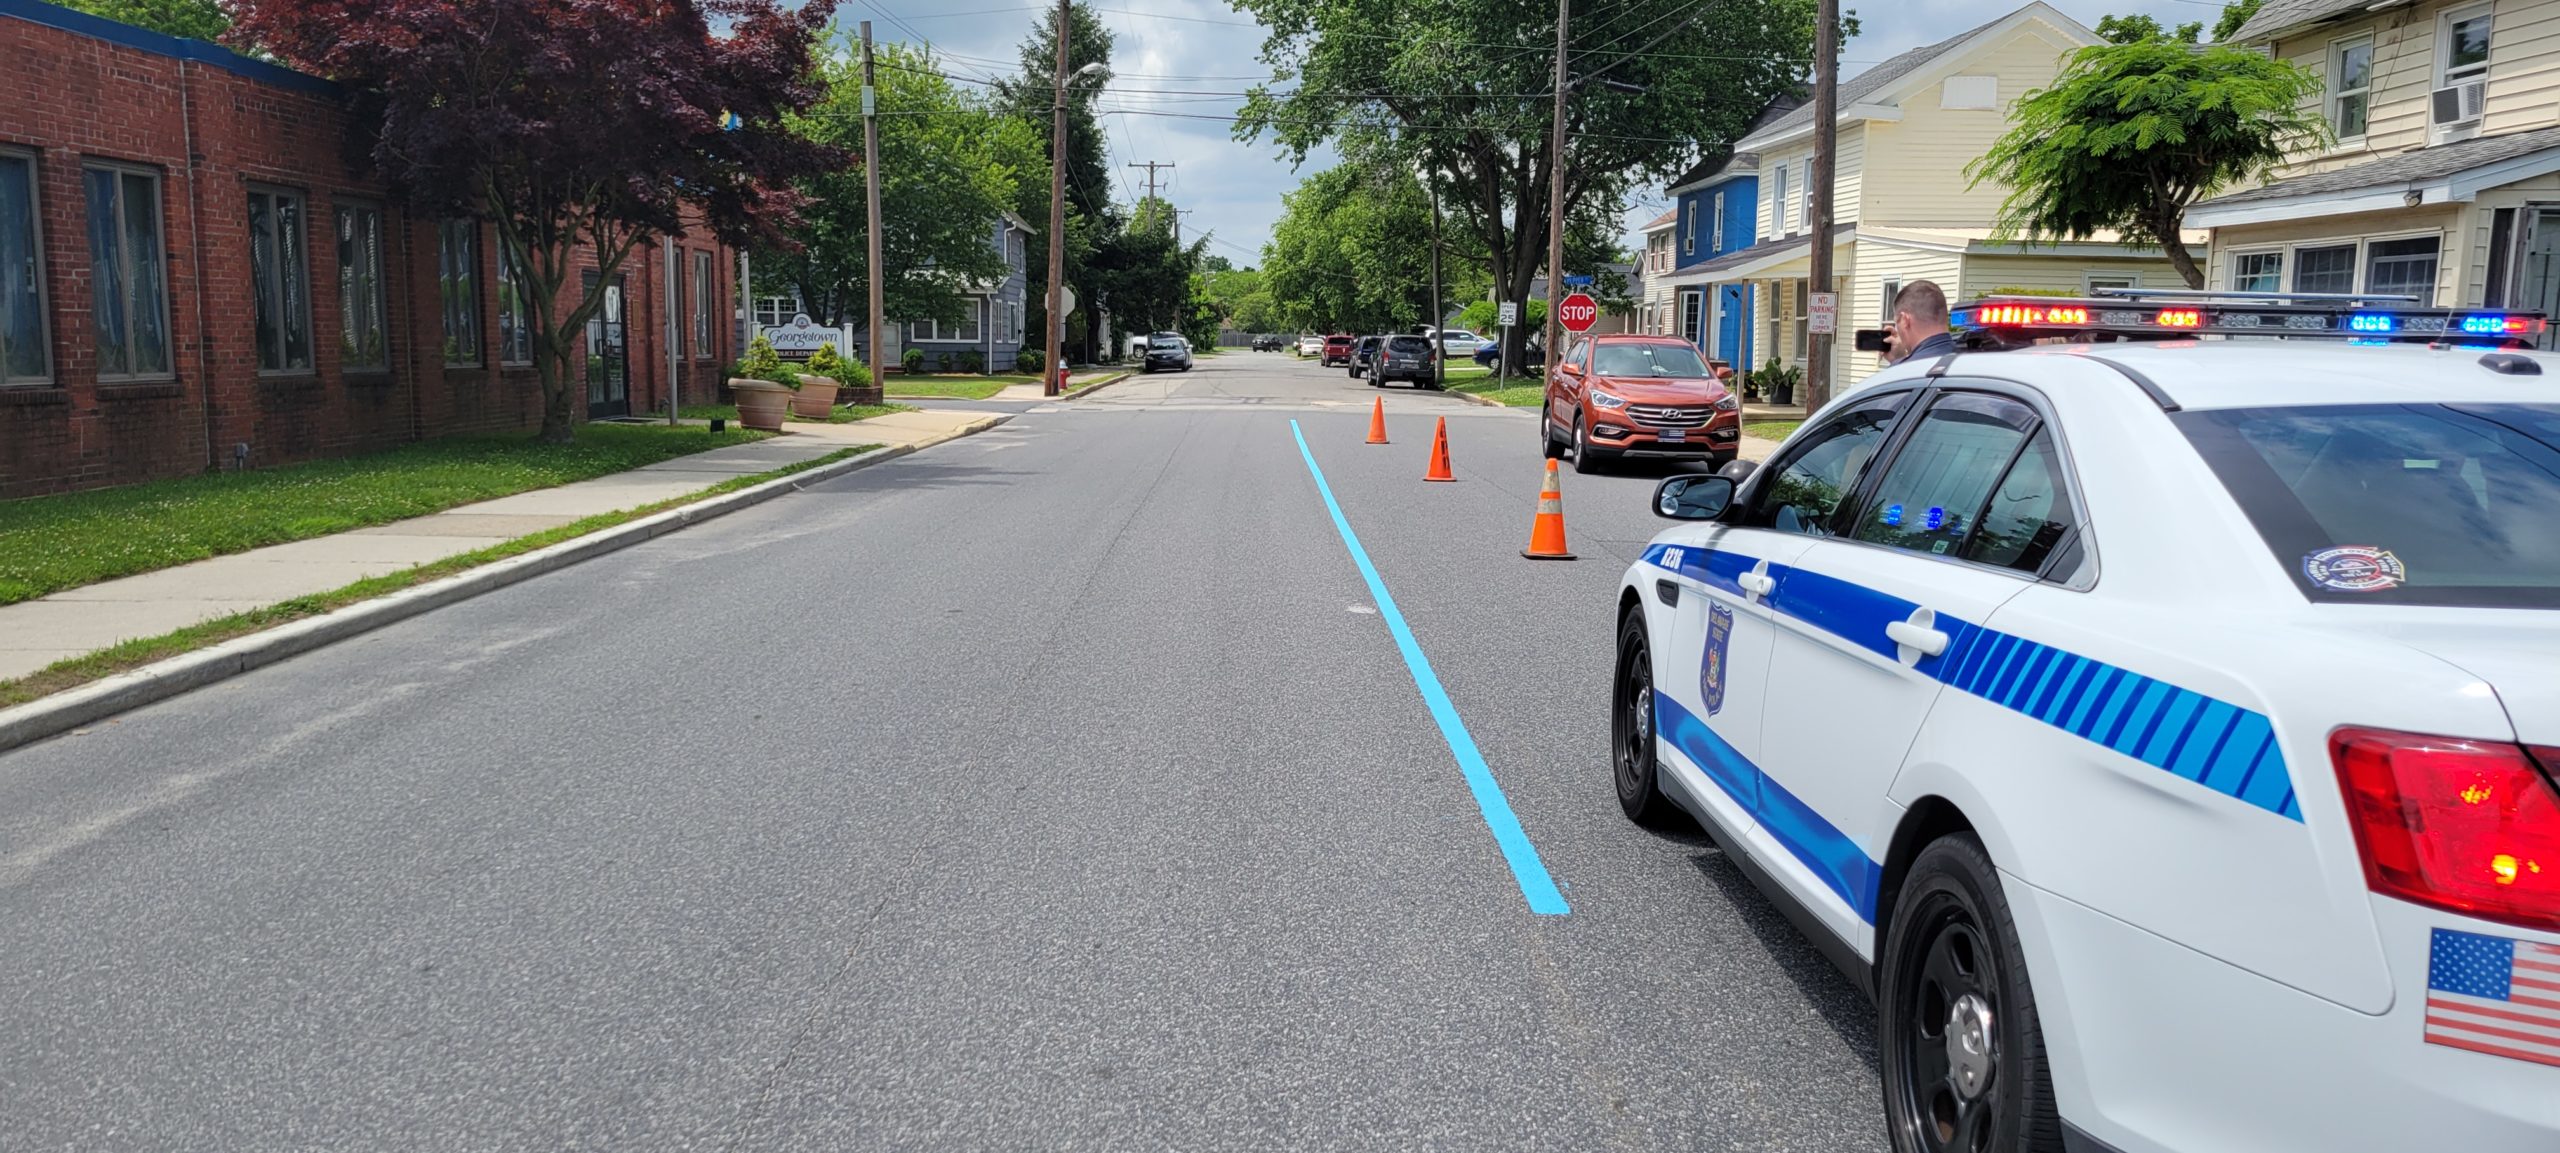 Featured image for “Delaware group paints blue lines in public so police can see support”